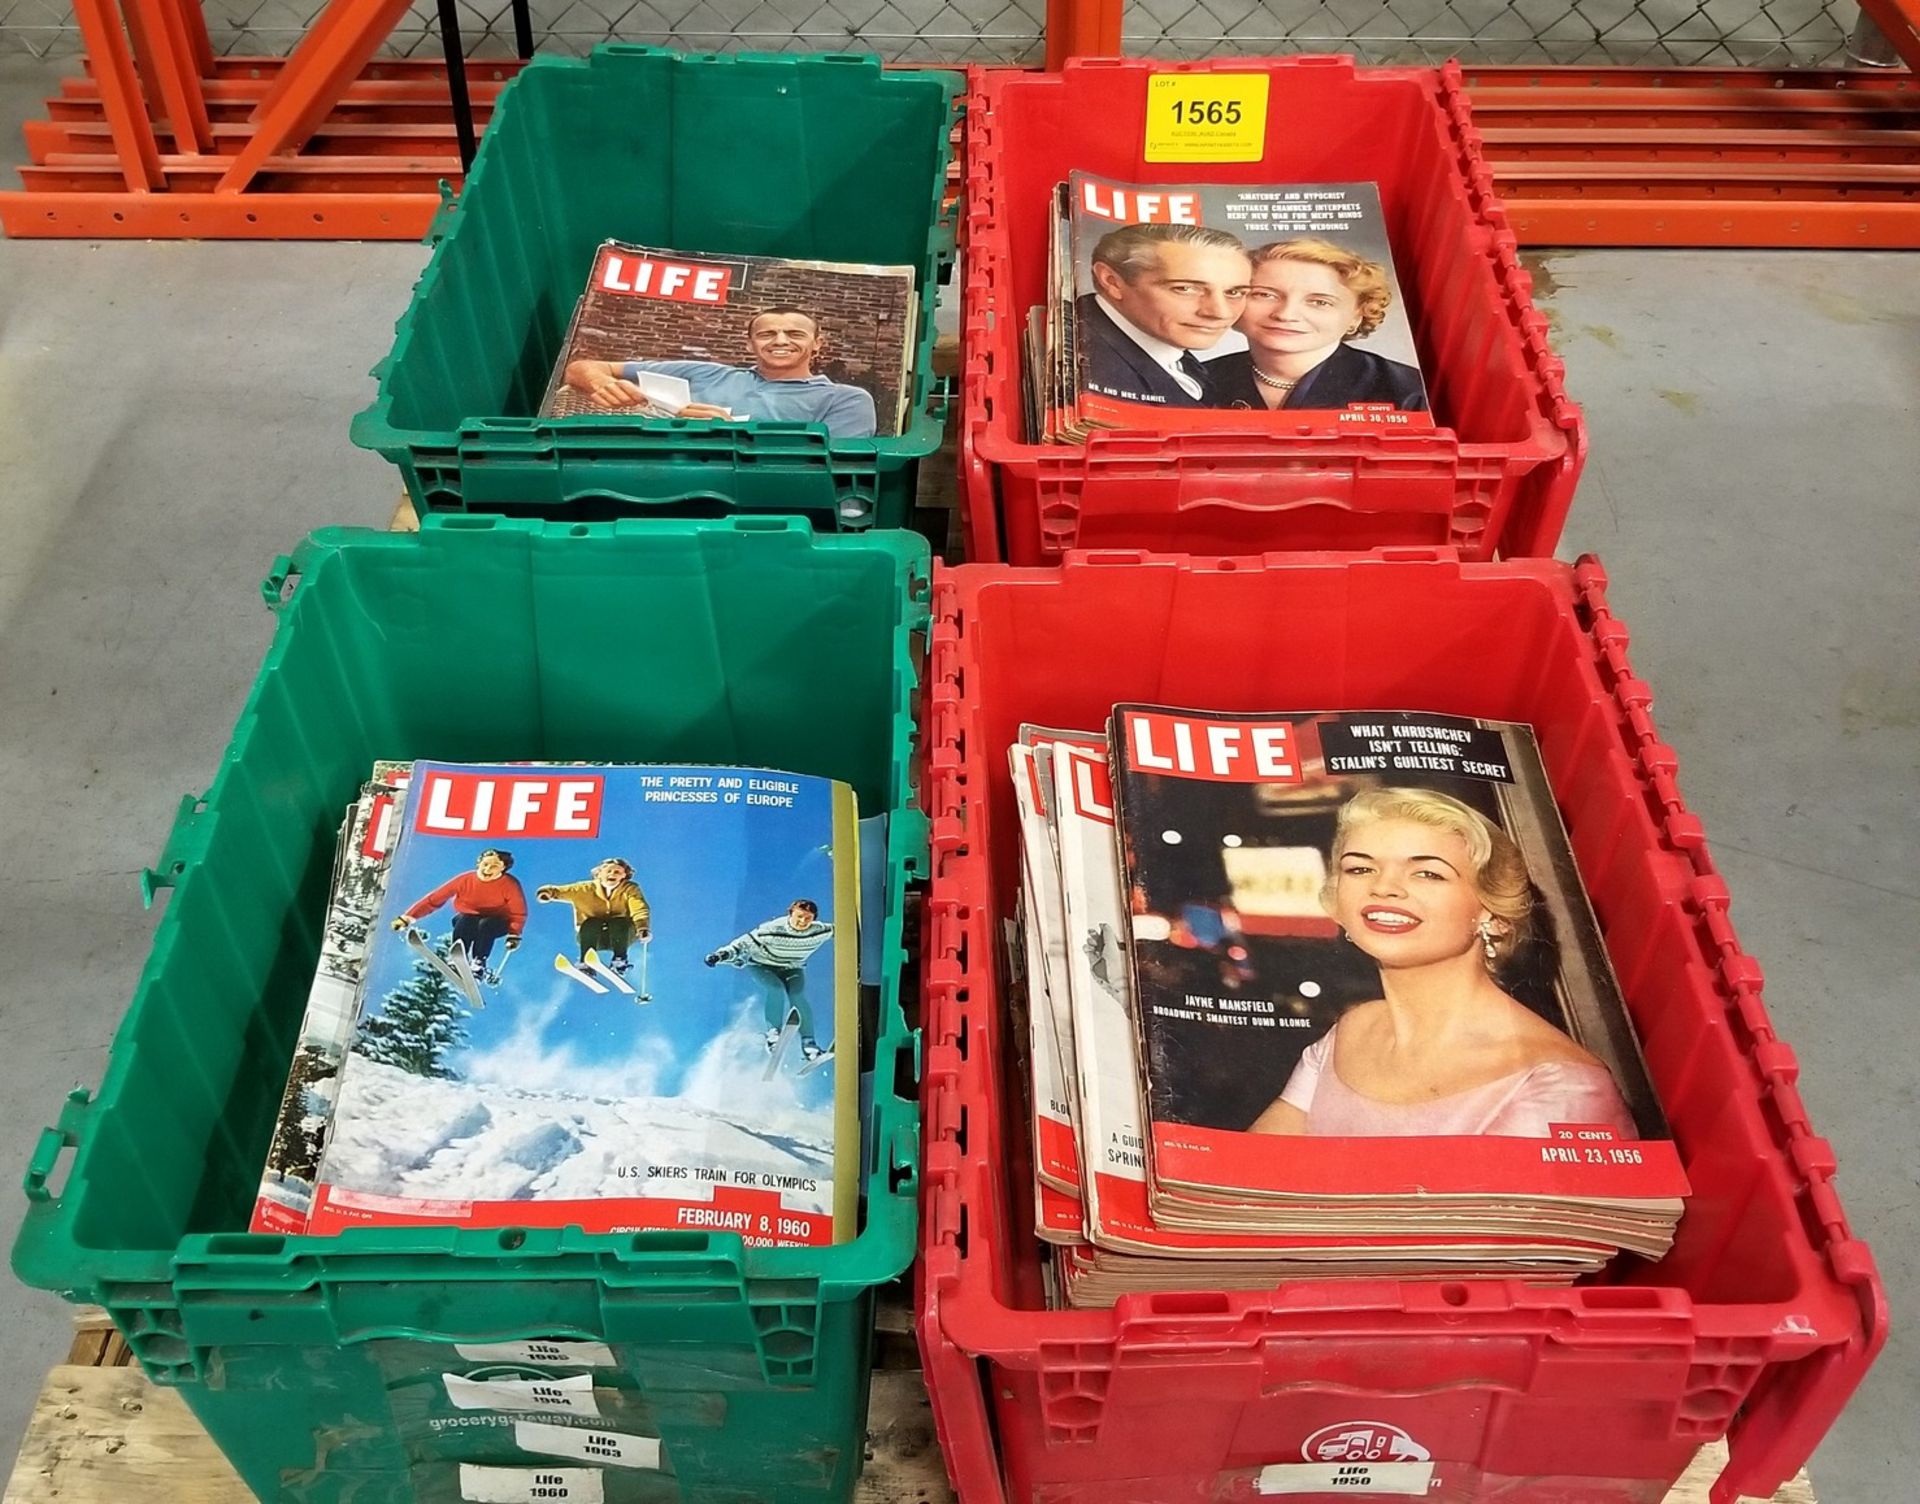 VINTAGE TIME MAGAZINES - APPROX 160 ISSUES - YEARS INDICATED IN PHOTOS - 1950, 1956, 1960, 1961,